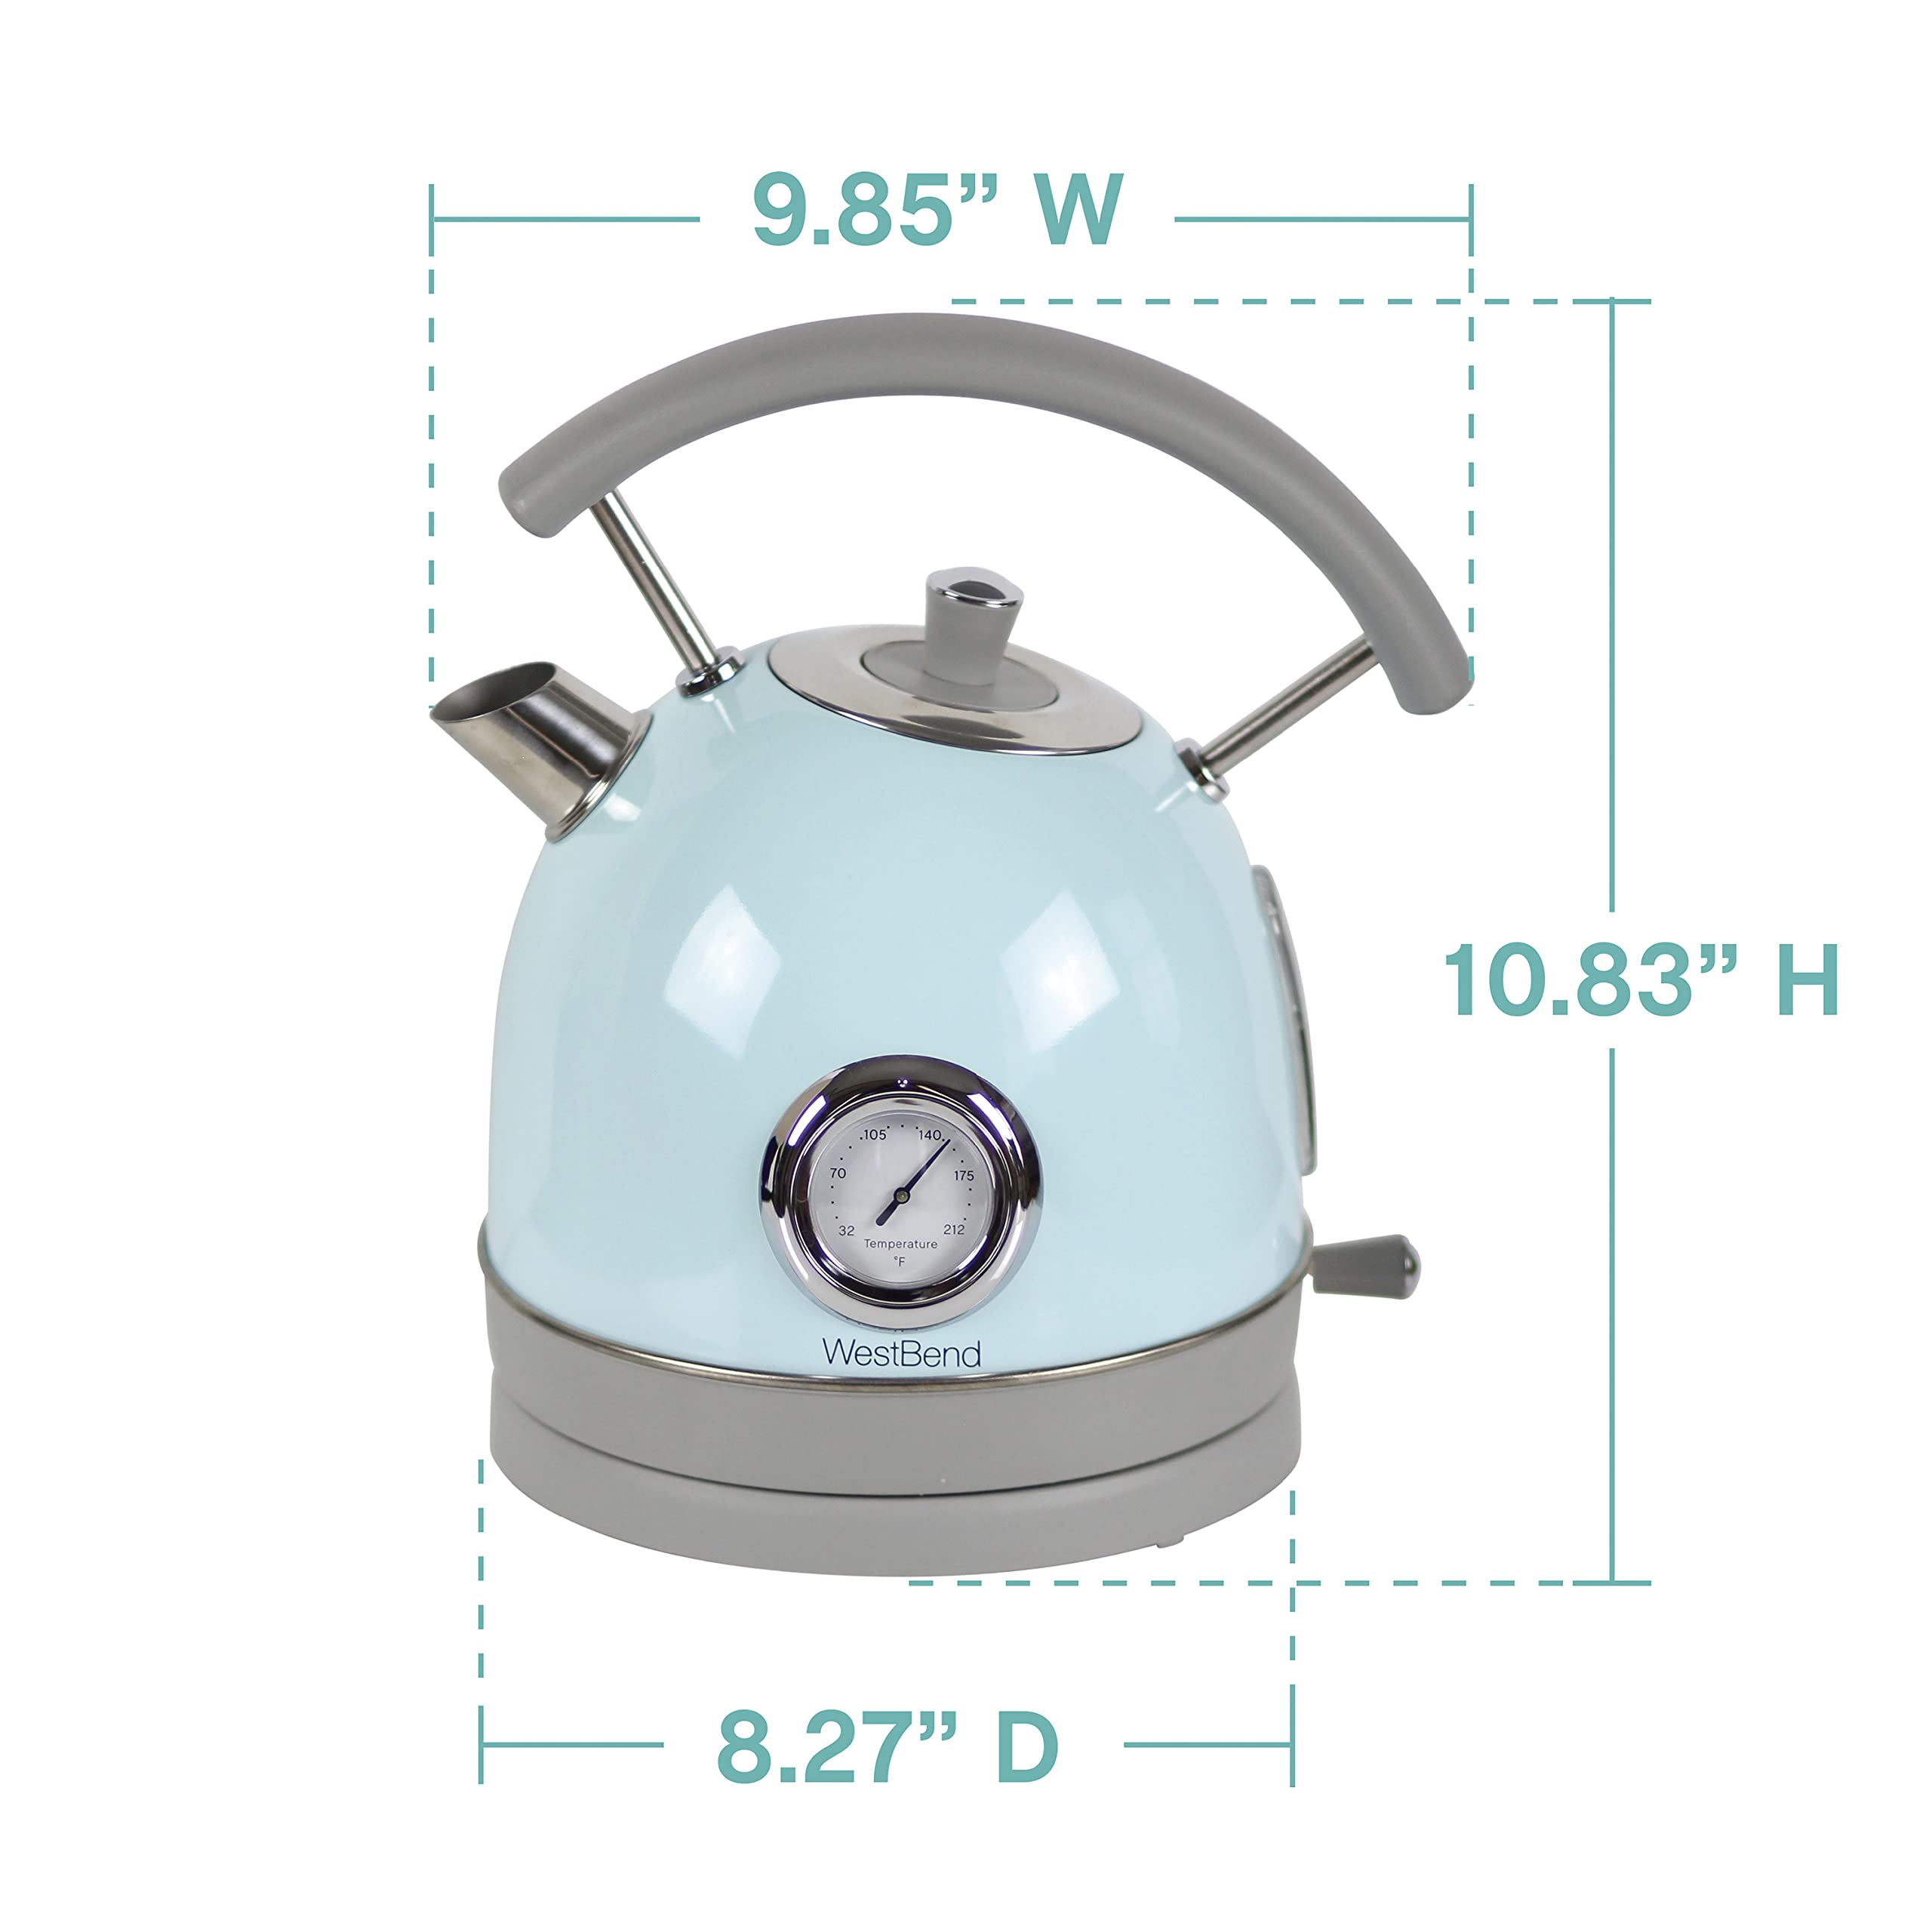 West Bend Electric Kettle Retro-Styled Stainless Steel 1500 Watts with Auto-Shutoff & Boil-Dry Protection, 1.7-Liter, Blue